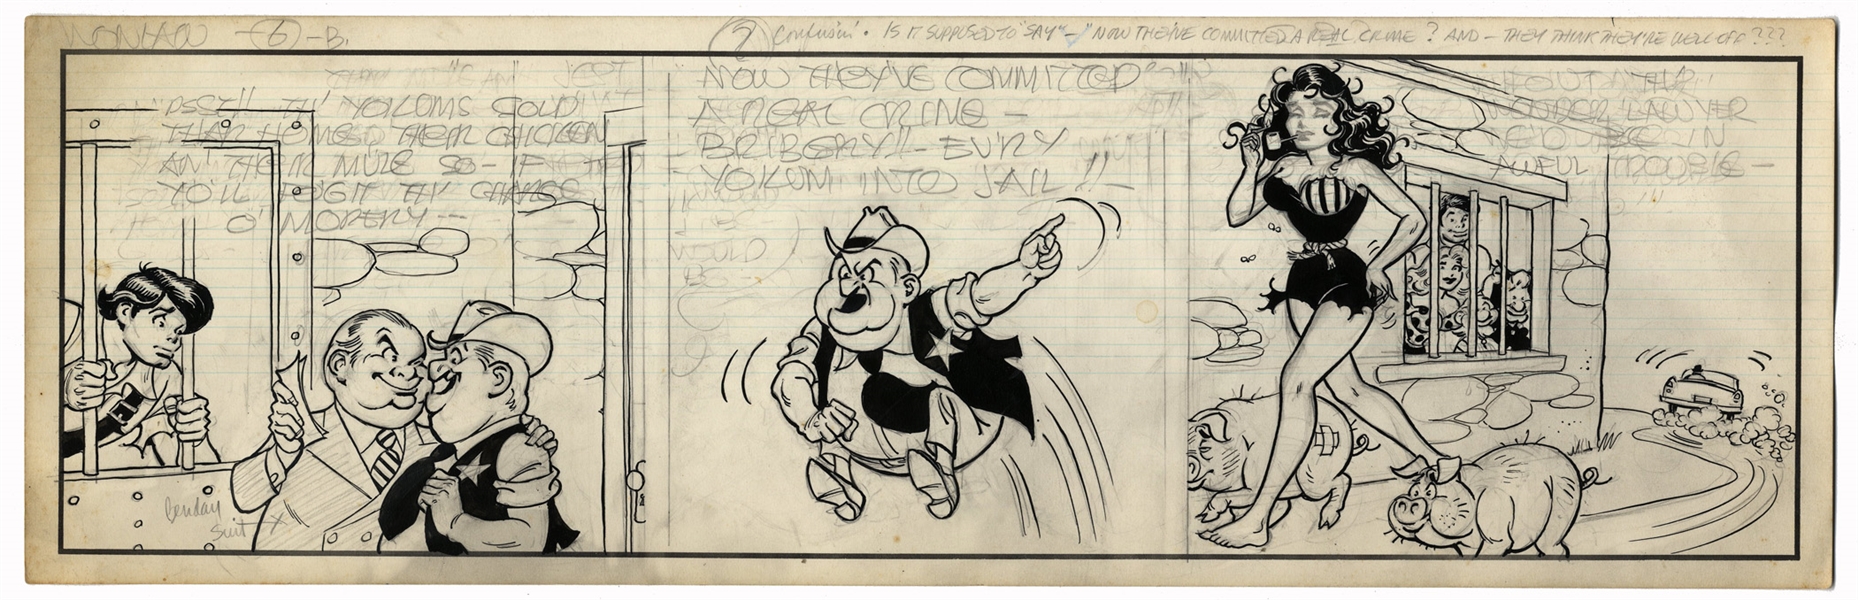 Al Capp ''Li'l Abner'' Unfinished Hand-Drawn Comic -- Featuring Li'l Abner & Moon Beam McSwine -- Measures 19.5'' x 6.25'' in Pencil & Ink, Sketches to Verso -- Very Good -- From Capp Estate